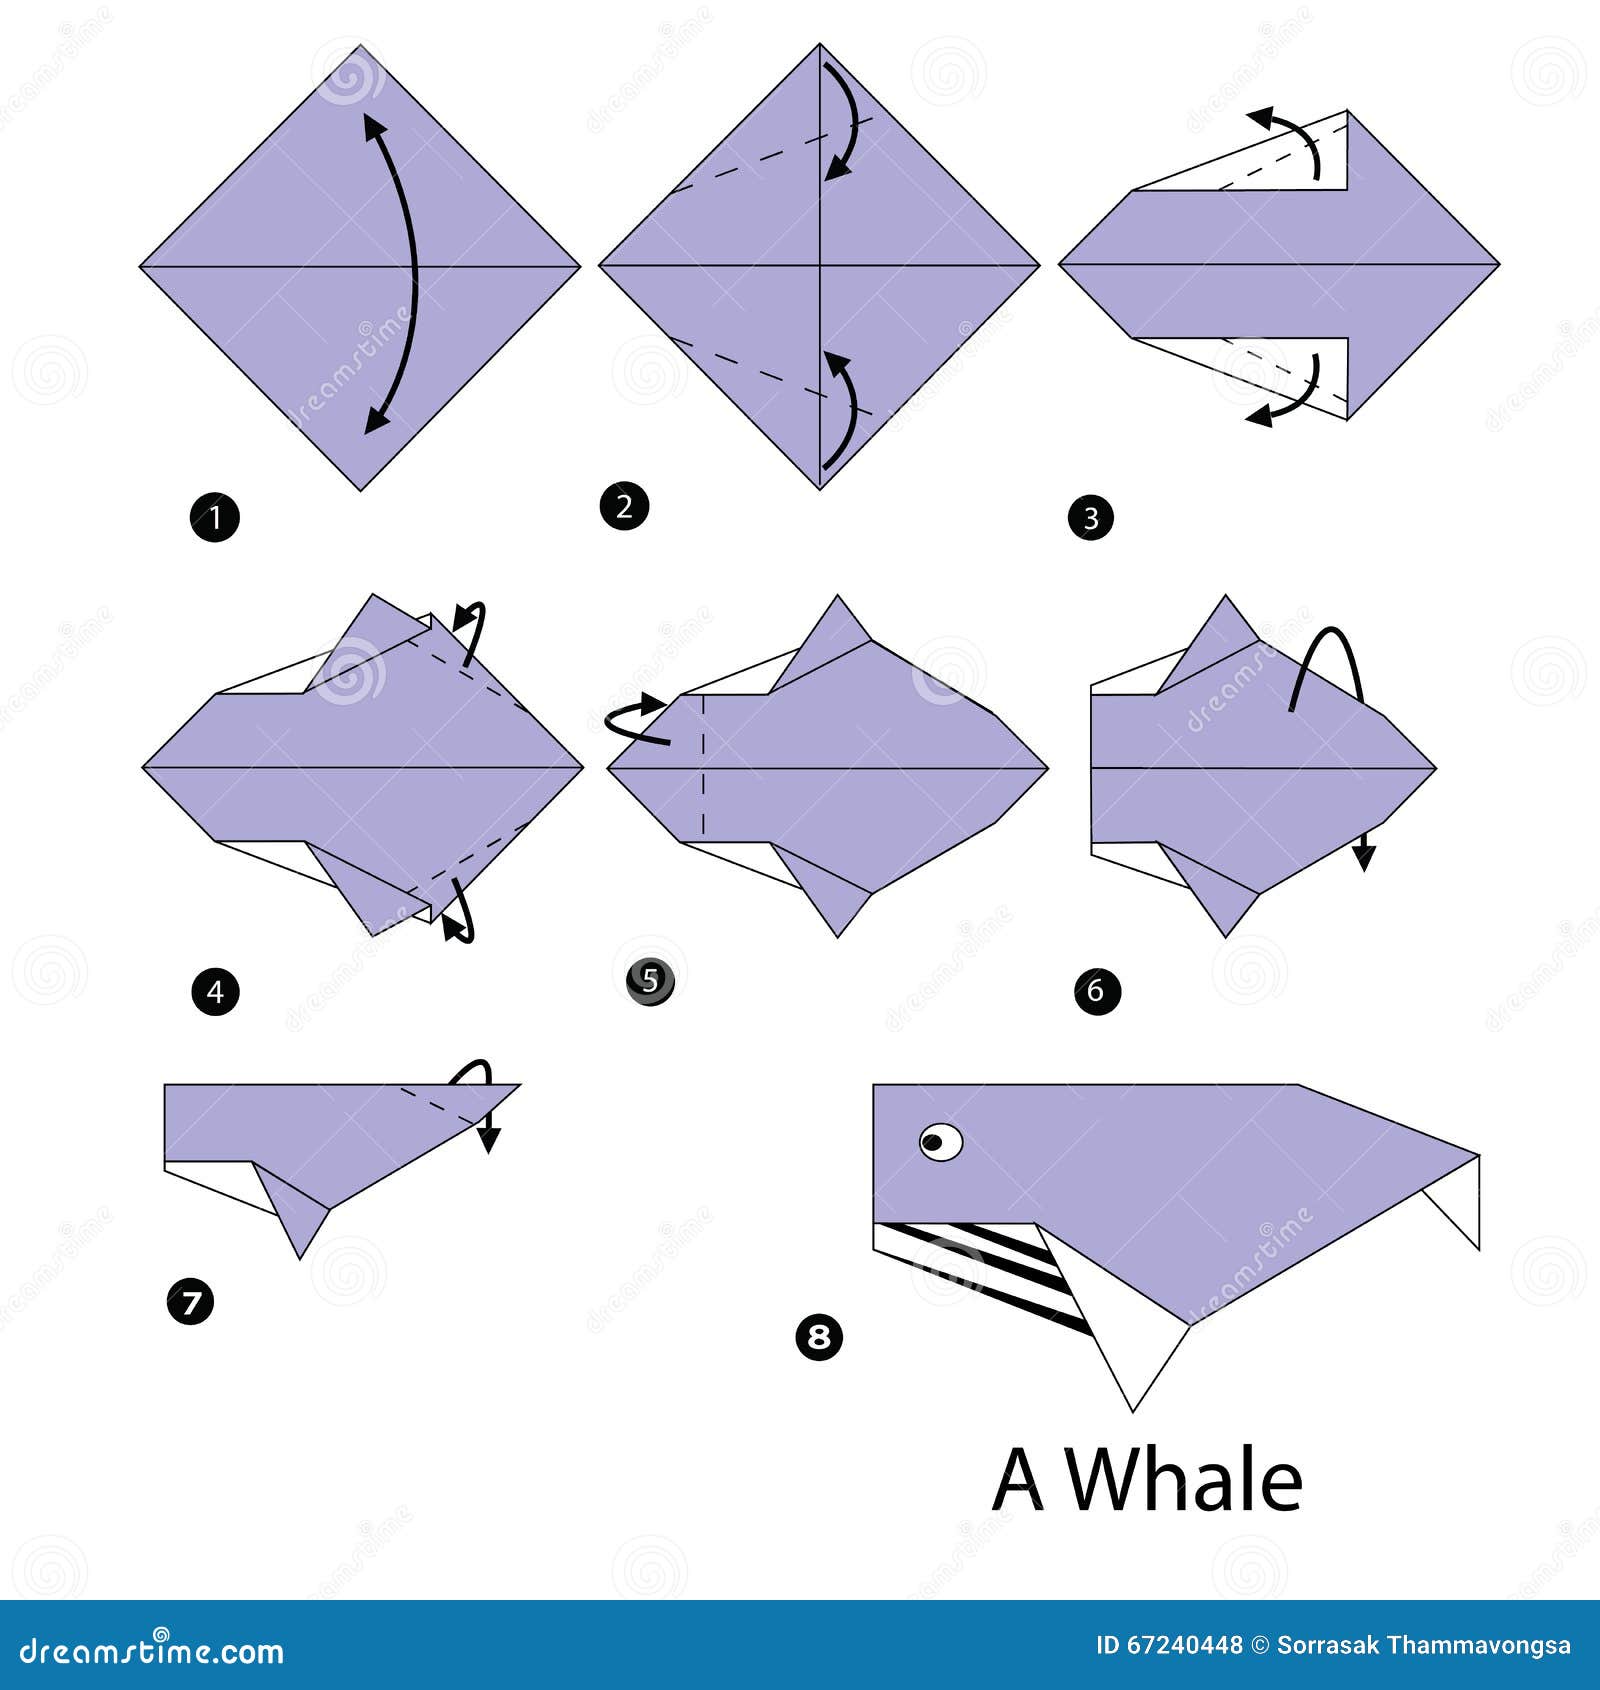 Step By Step Instructions How To Make Origami Whale. Stock Vector Illustration of instructions